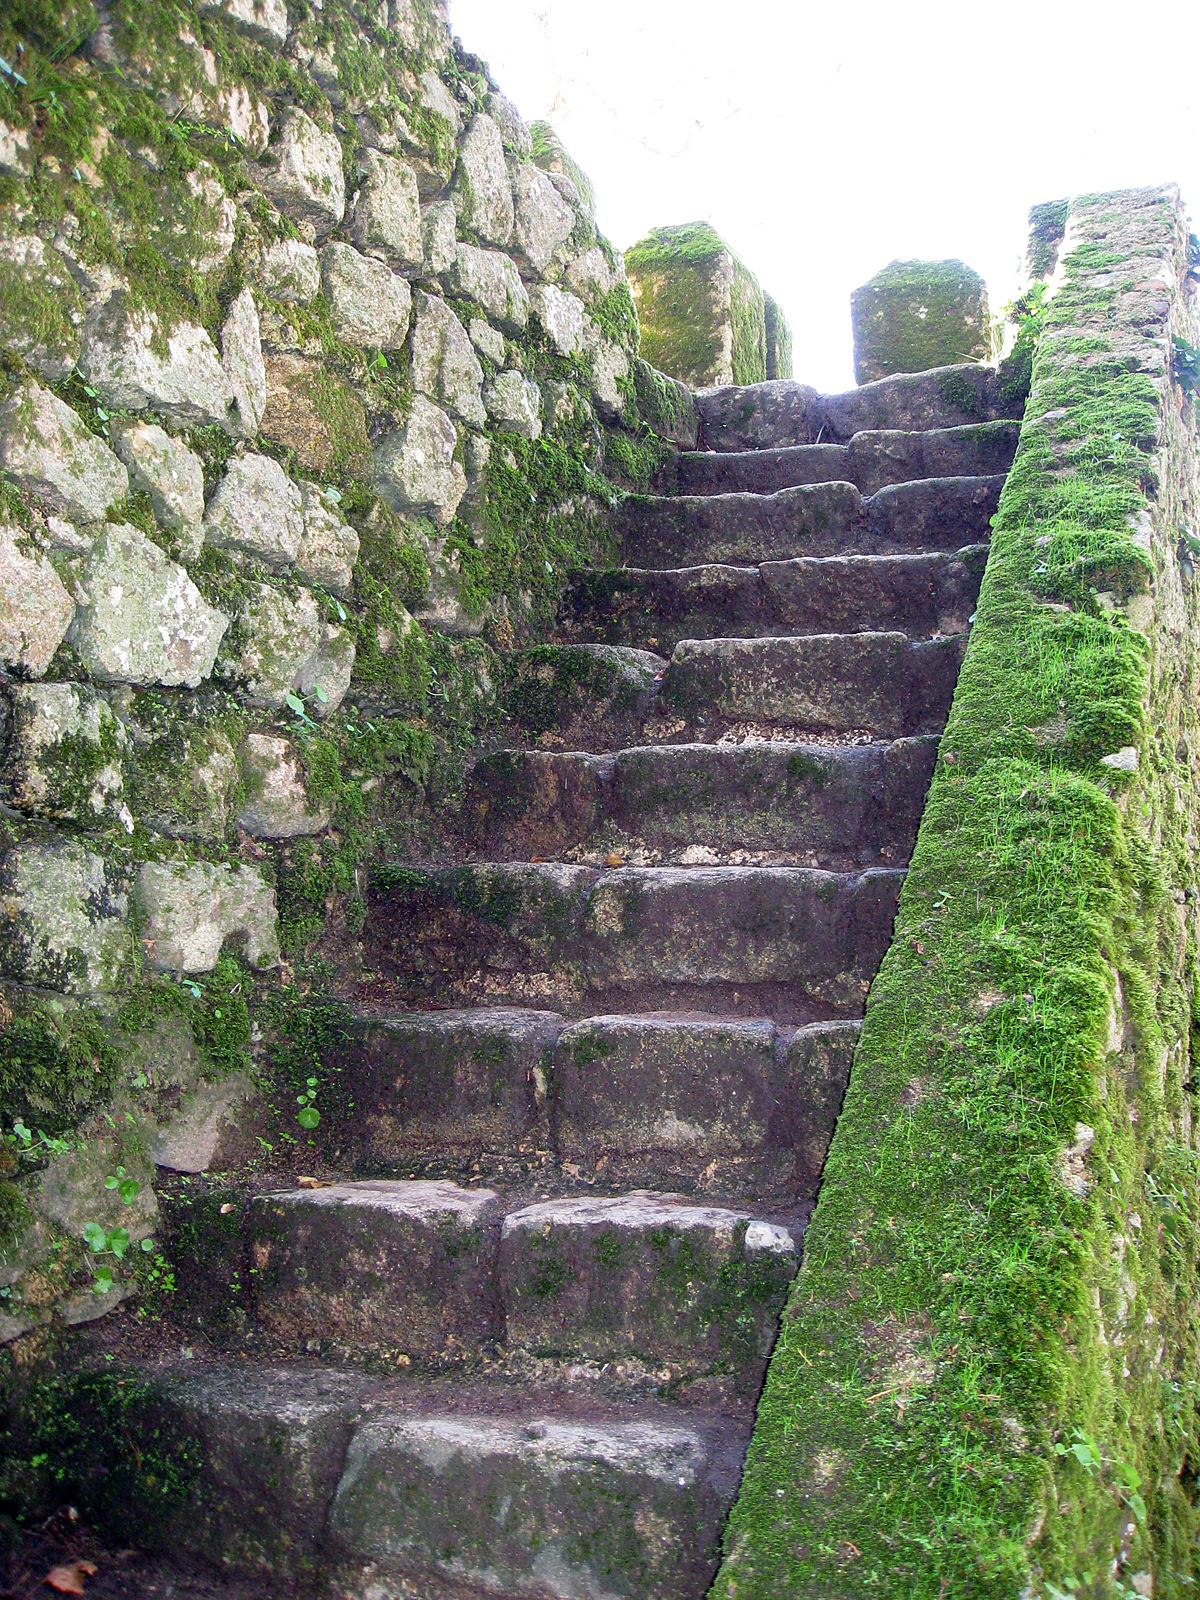 some stairs are covered in moss and stone